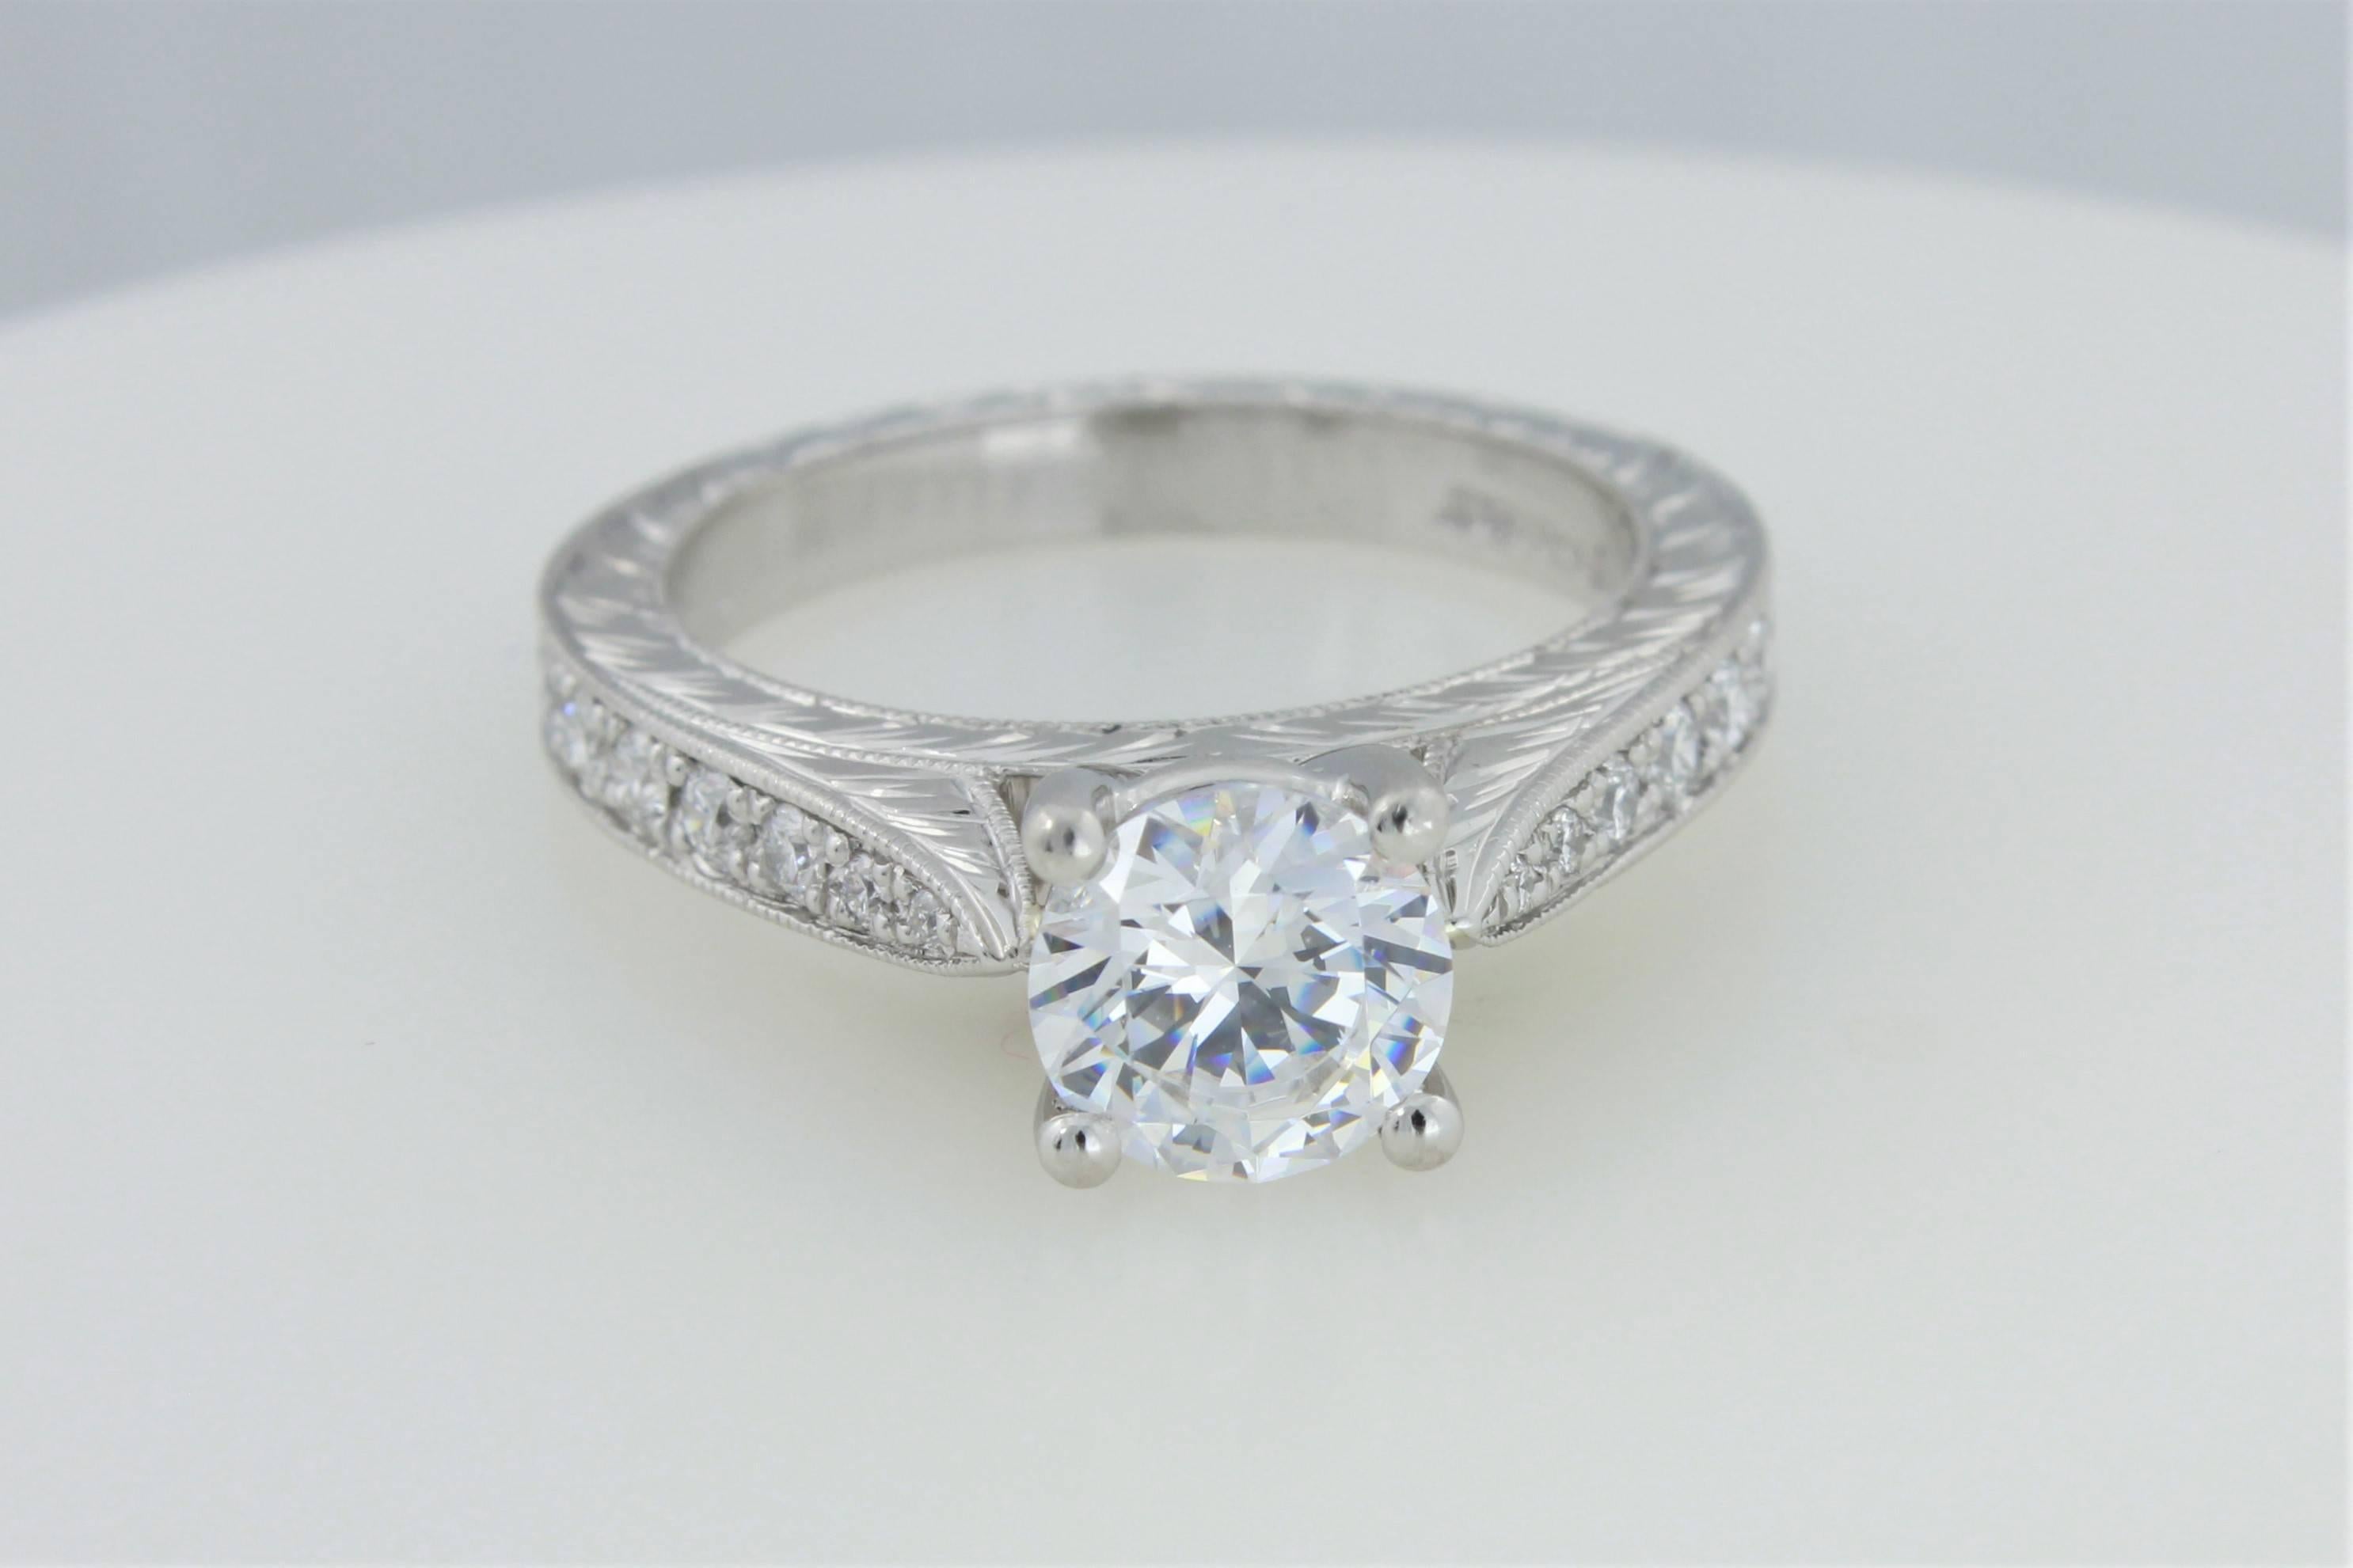 Platinum Diamond Precision Set Hand Engraved Flush Fit Ring Mounting In New Condition For Sale In Walnut Creek, CA